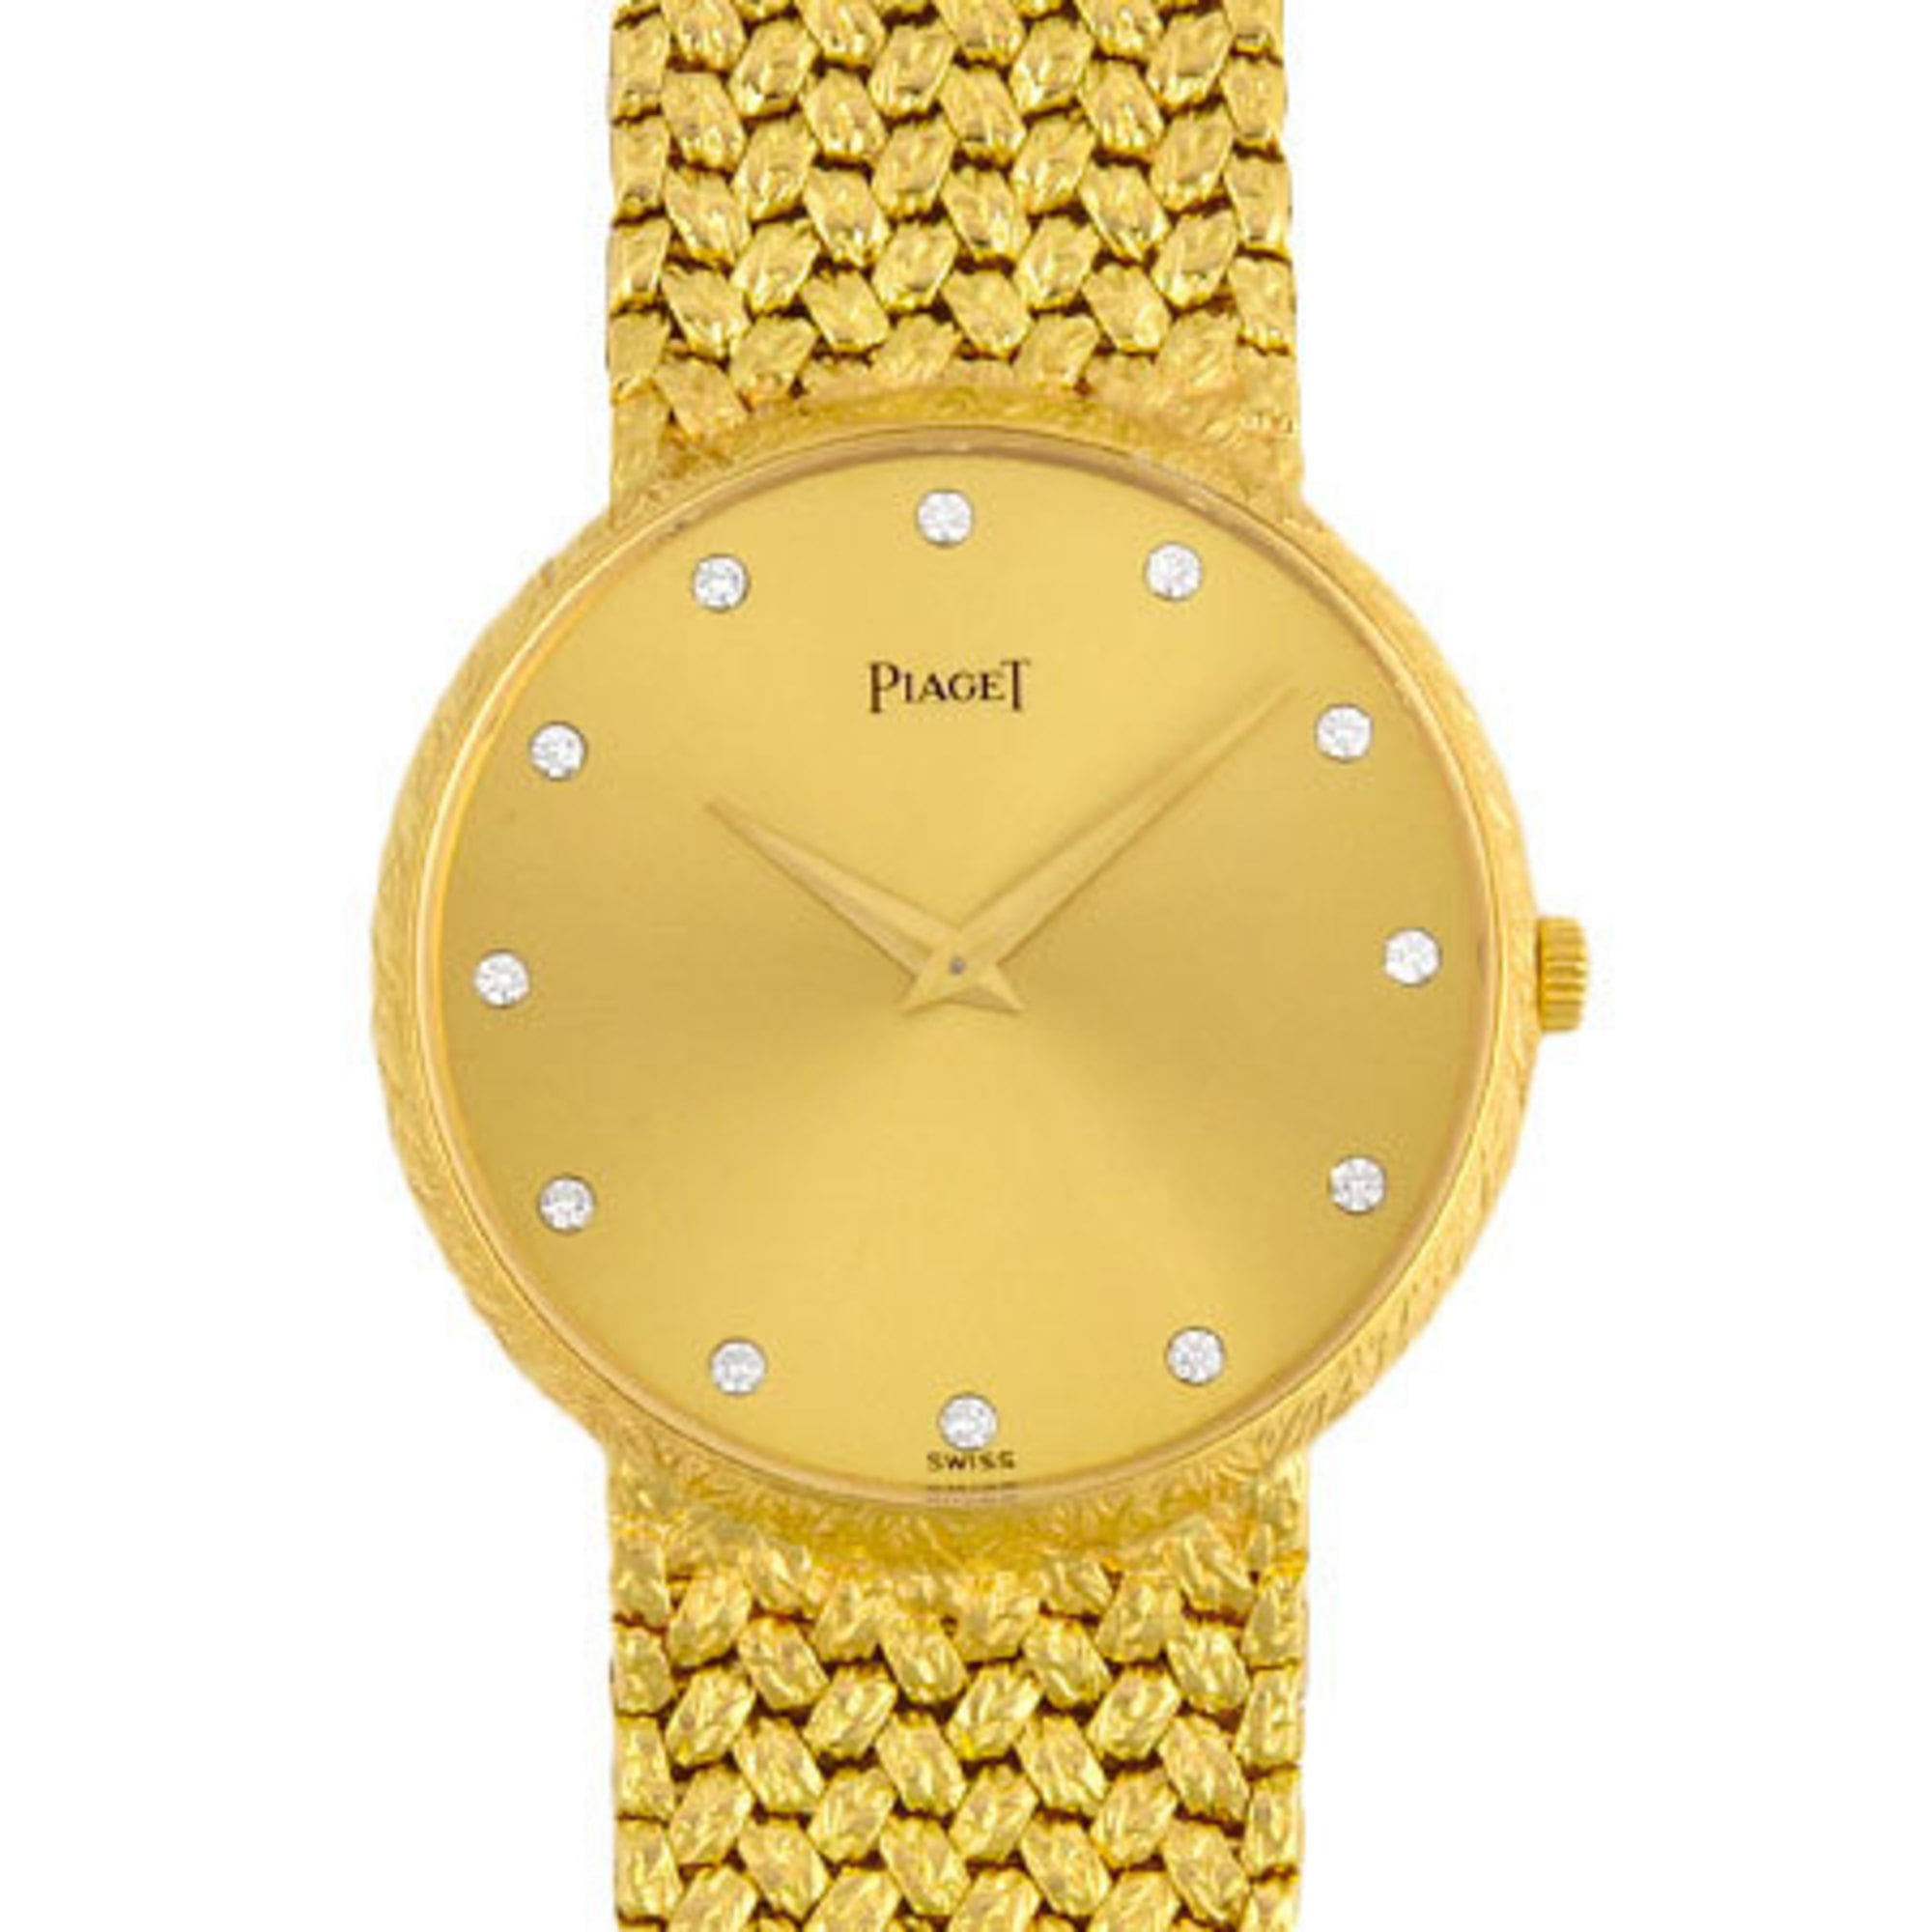 Watches for Men - Piaget Watches and Jewelry